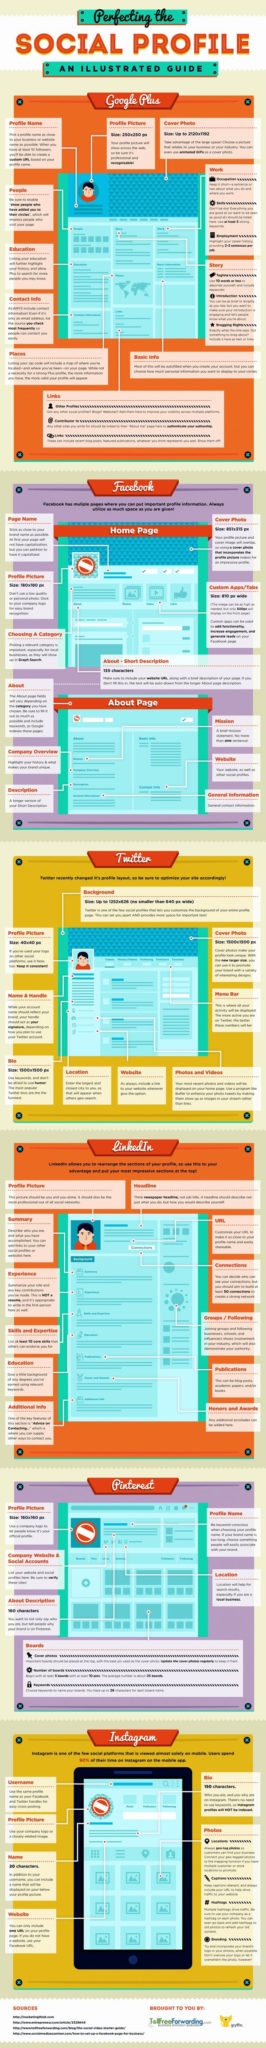 infographic-perfecting-social-profile